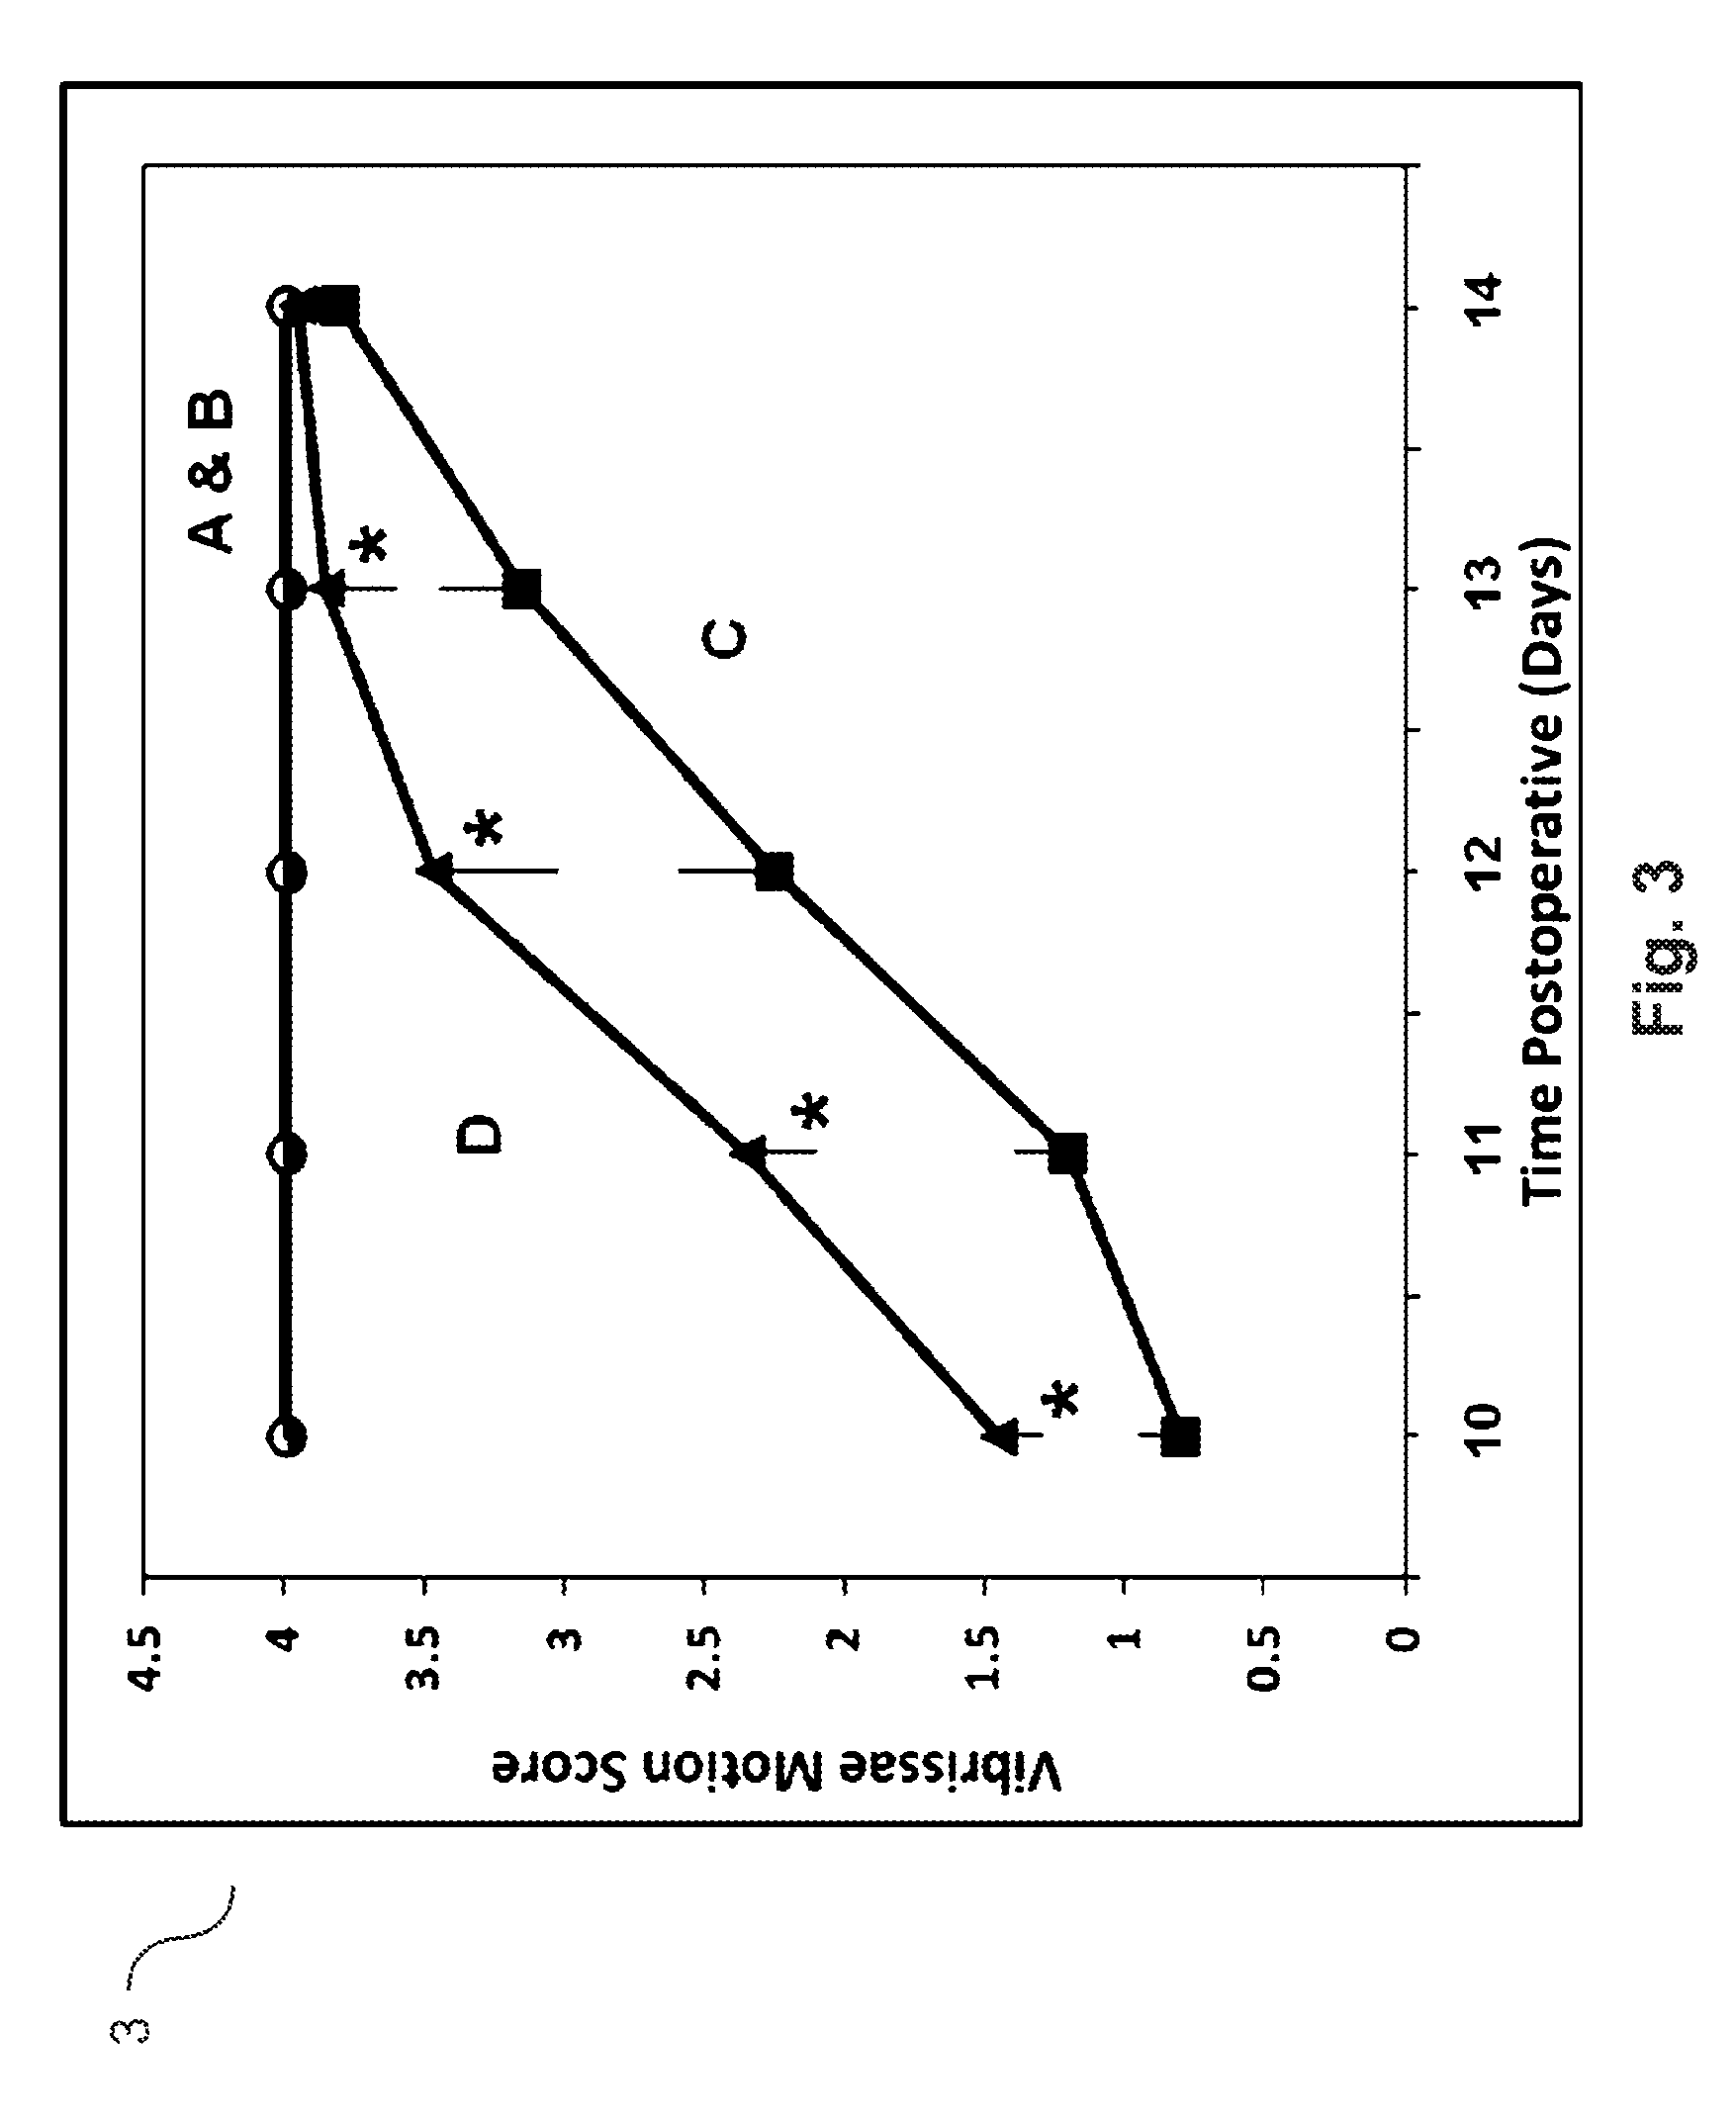 Agmatine containing dietary supplements, nutraceuticals, and foods